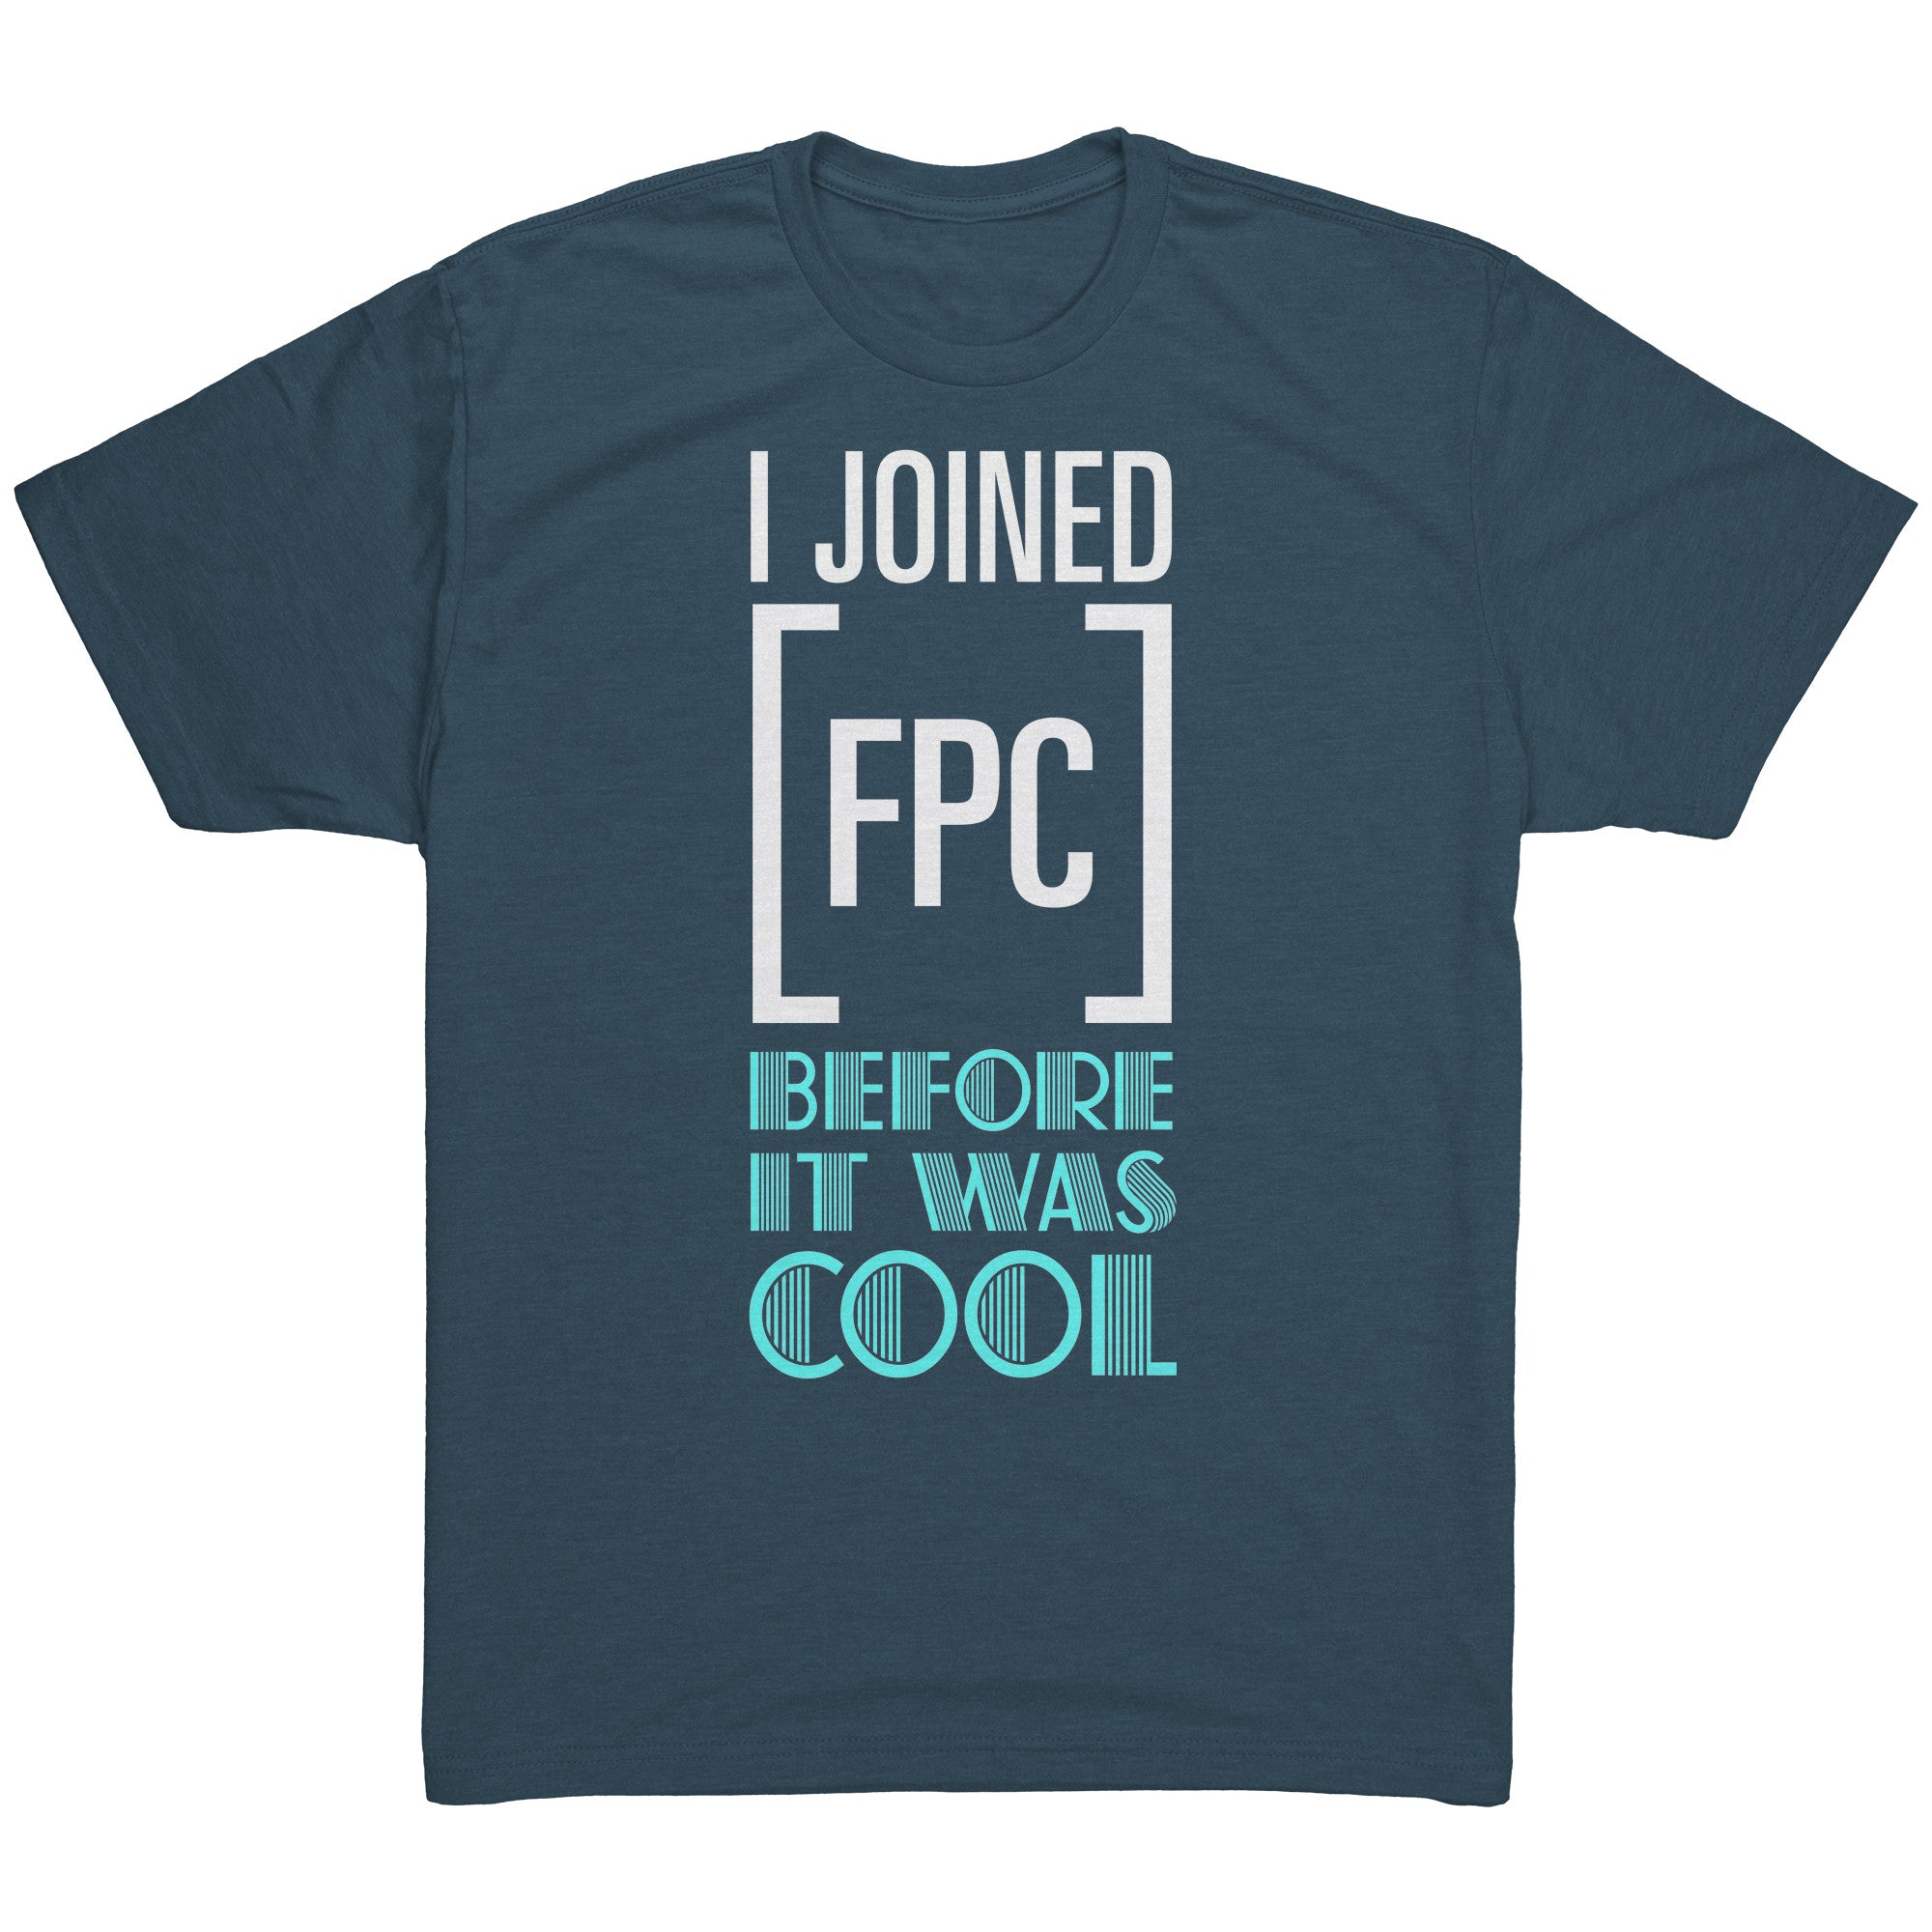 I_Joined_FPC_Before_it_was_Cool_Indigo_Mockup_png_2048x.jpg